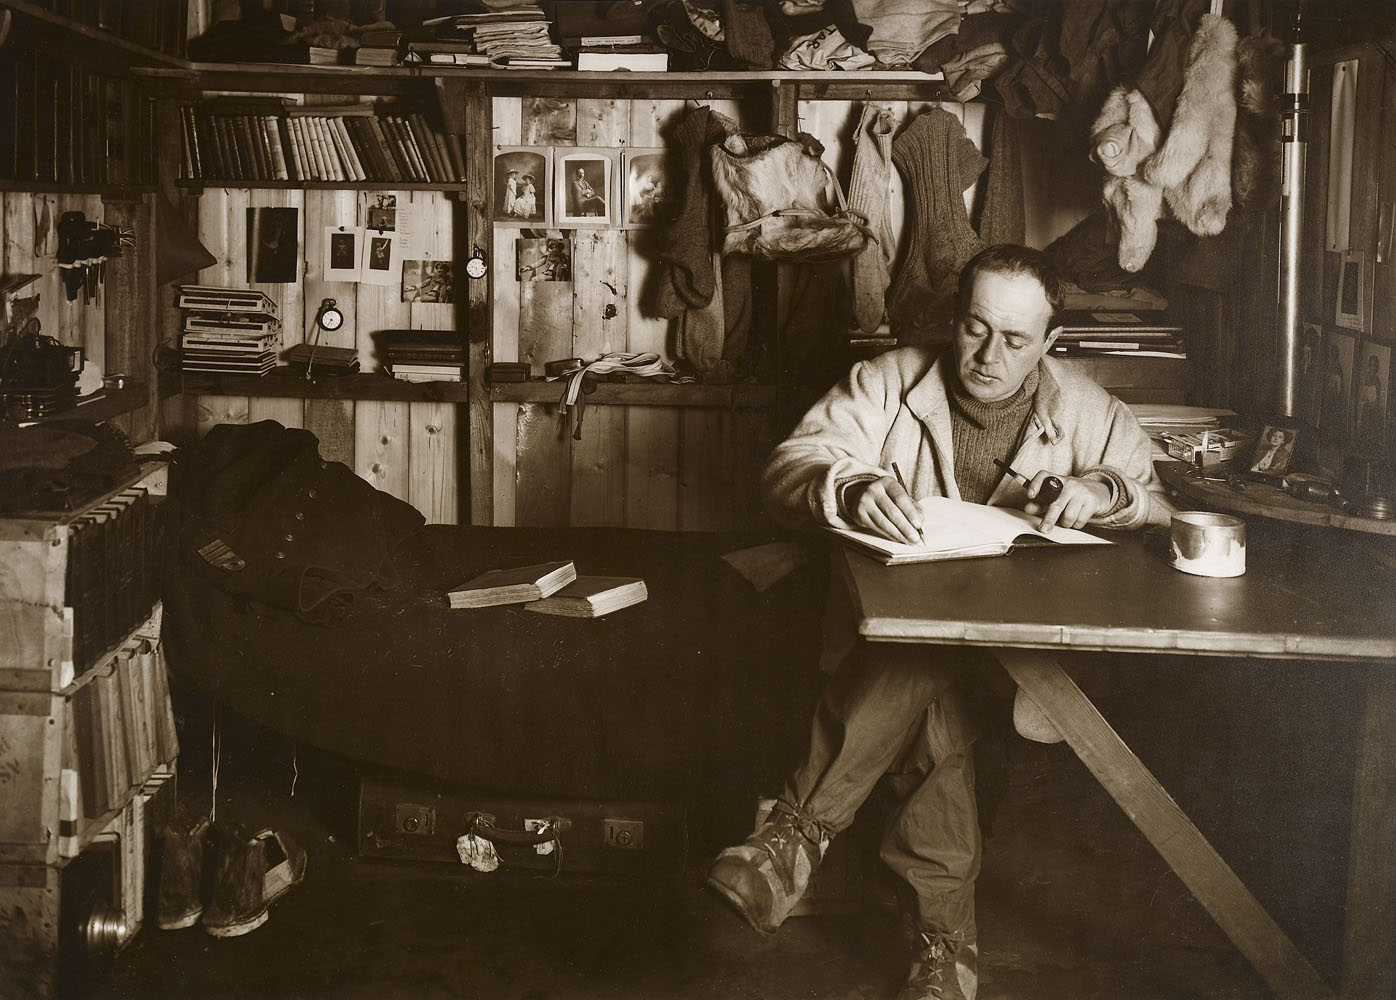 Captain Scott writing in his diary in the corner of his hut at Cape Evans surrounded by his personal belongings on October 7, 1911.